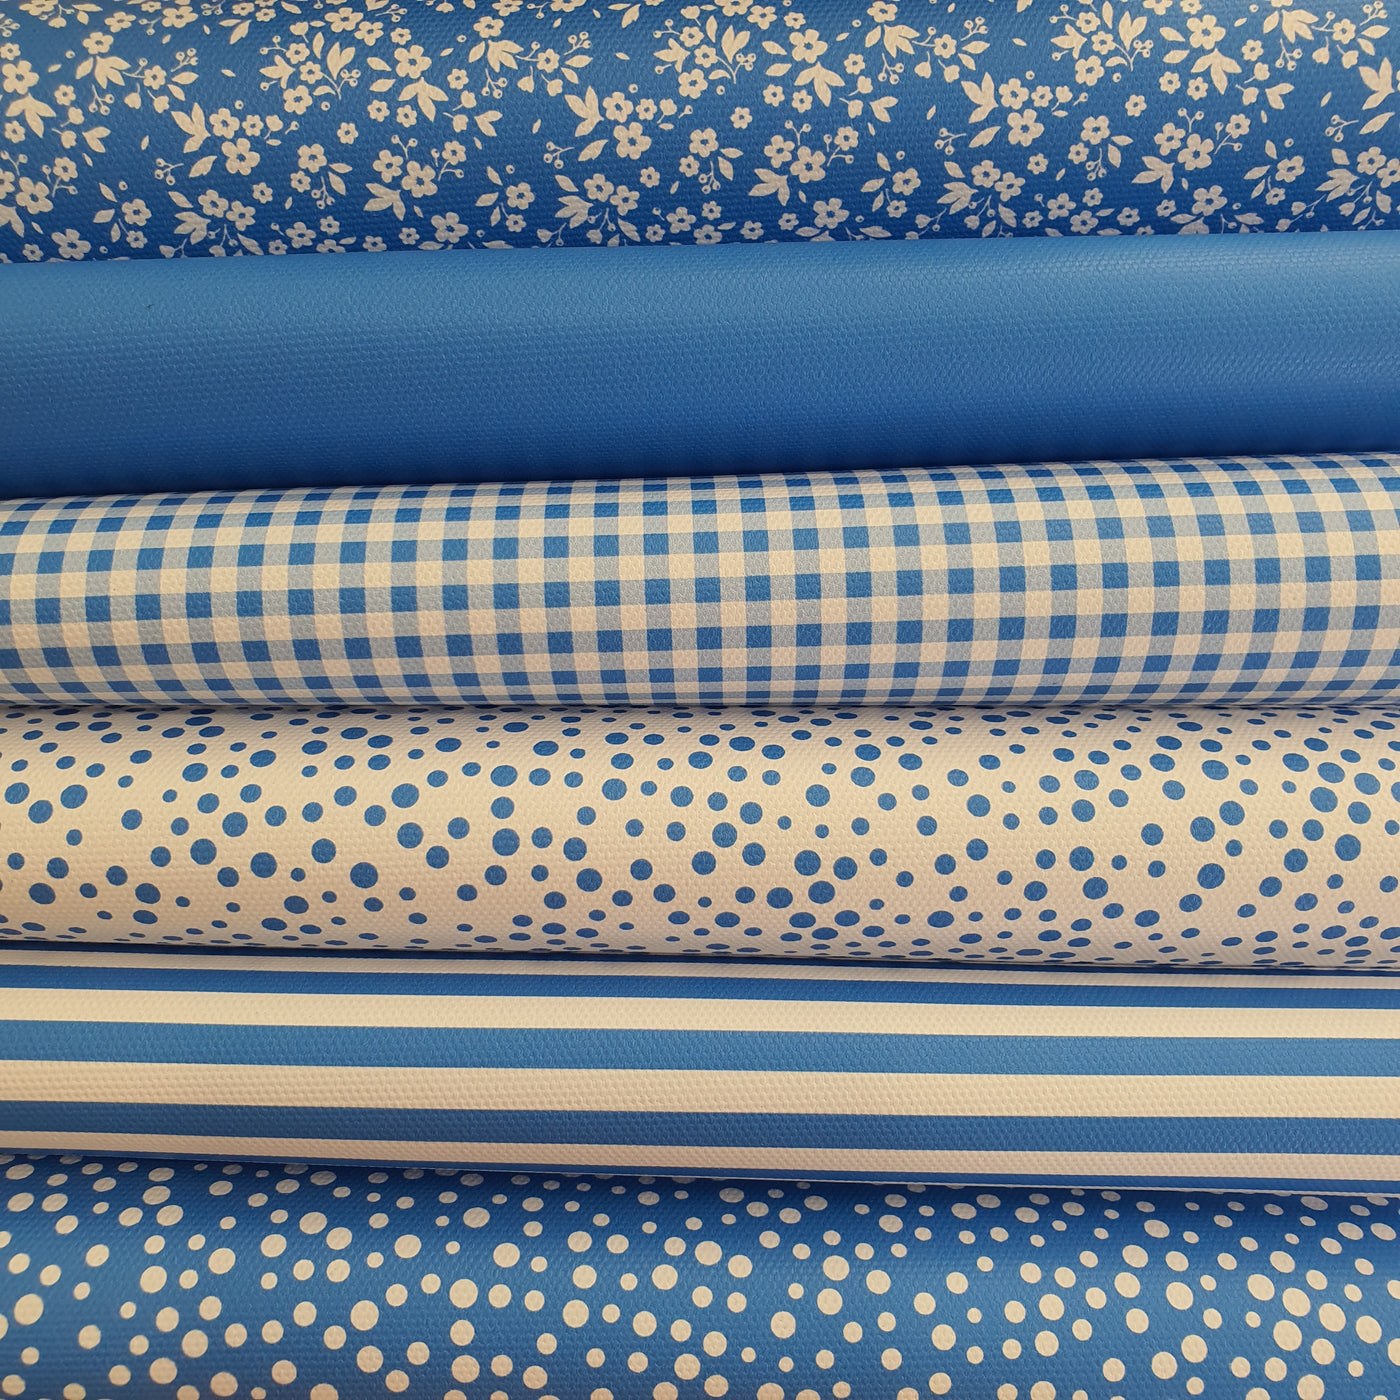 School blue gingham solid stripe dots flower - faux Pu Leather vinyl - canvas - choose Fabric material Sheets